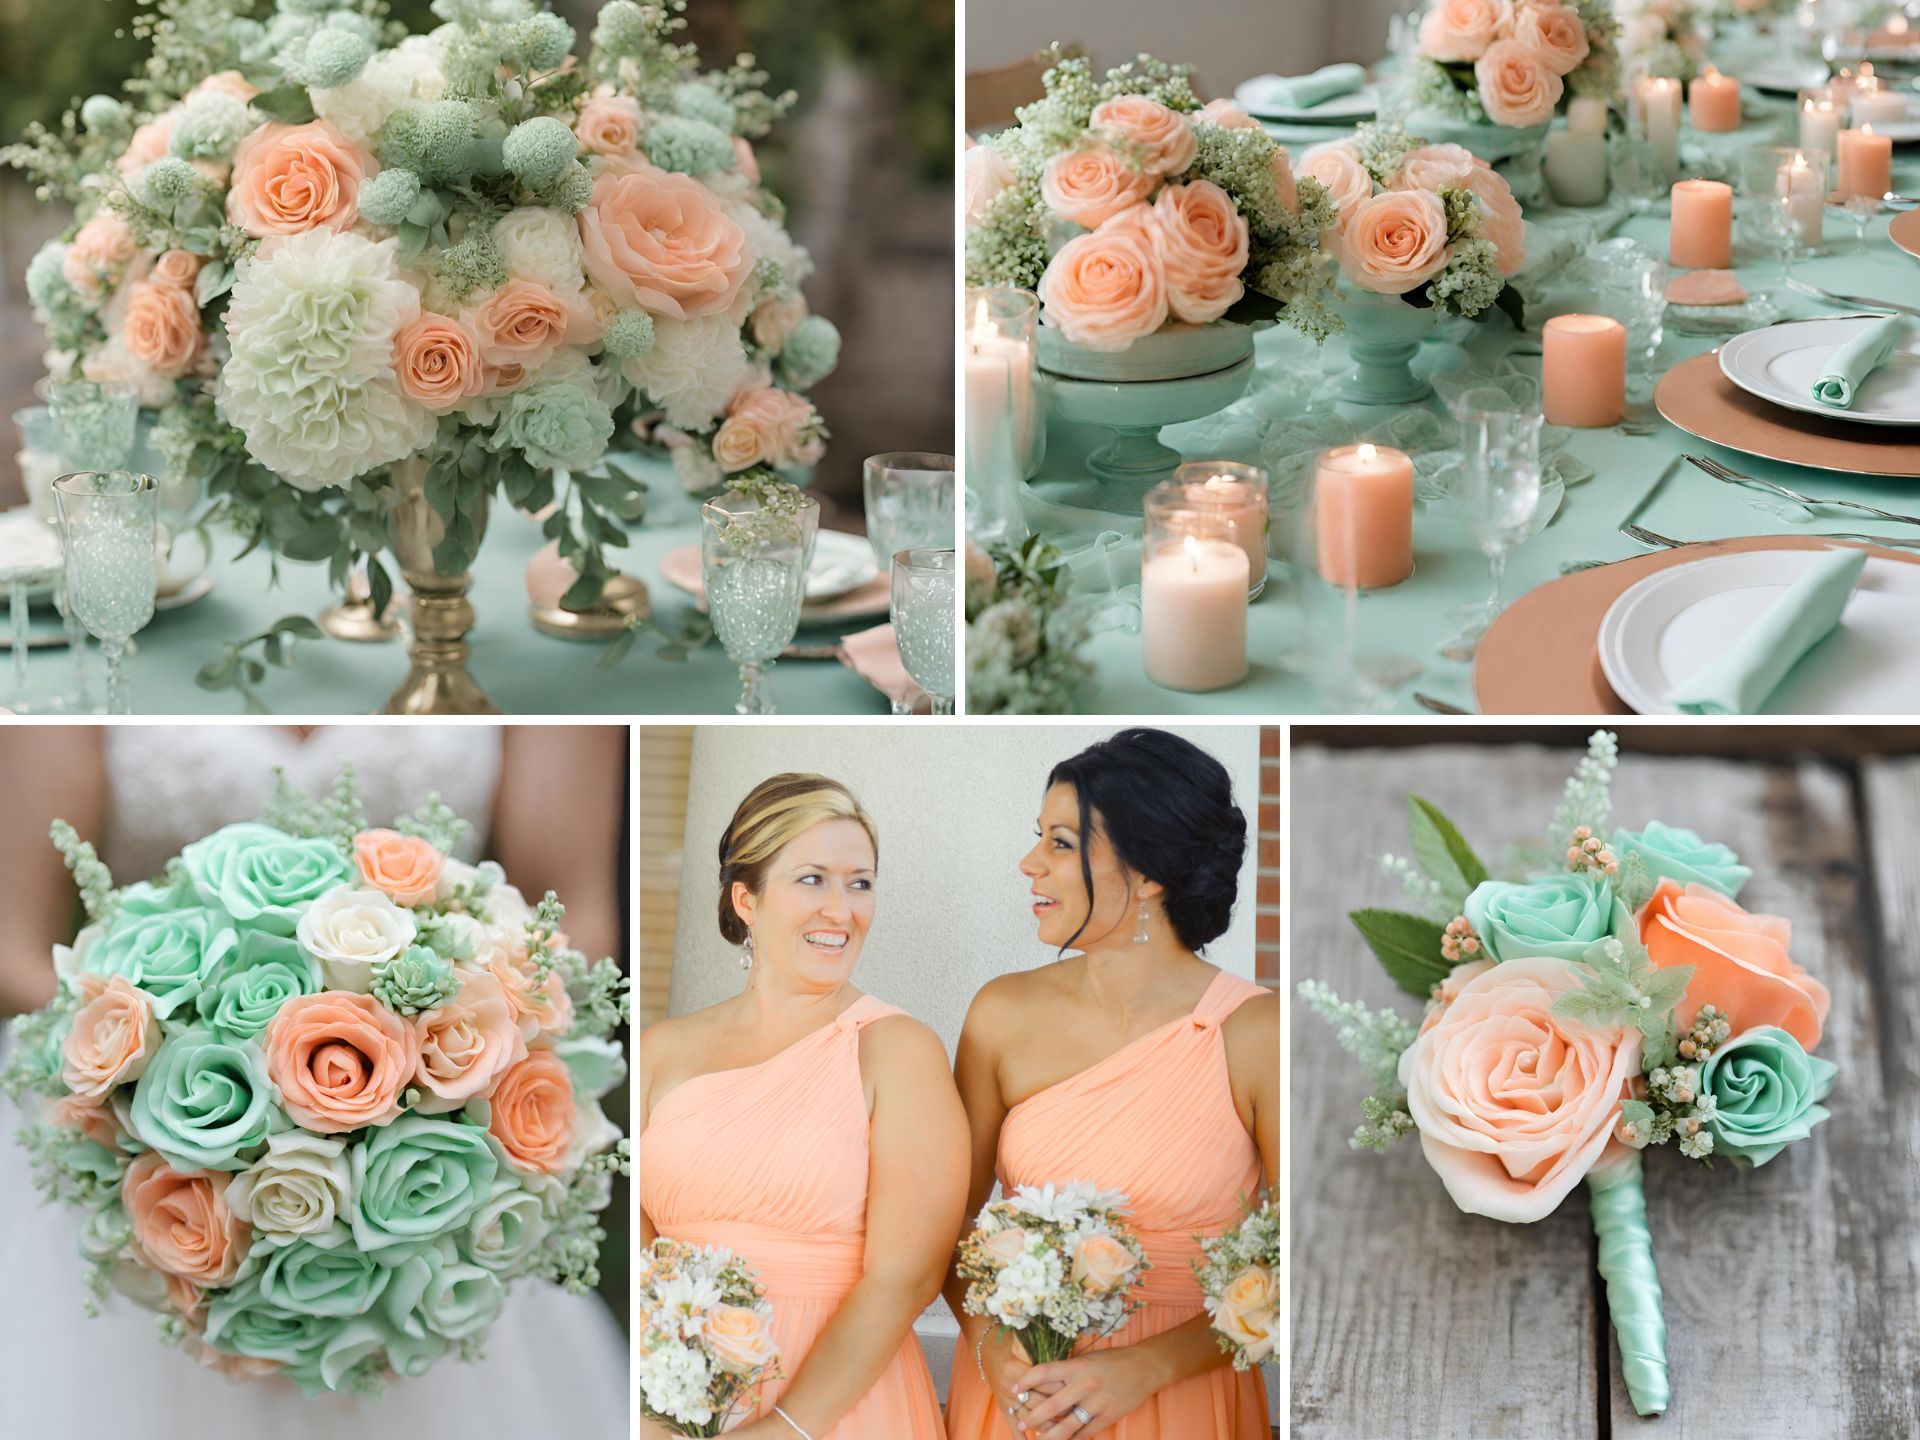 Mint and Peach Wedding Color Ideas: Beautiful Mint Green and Peach ...